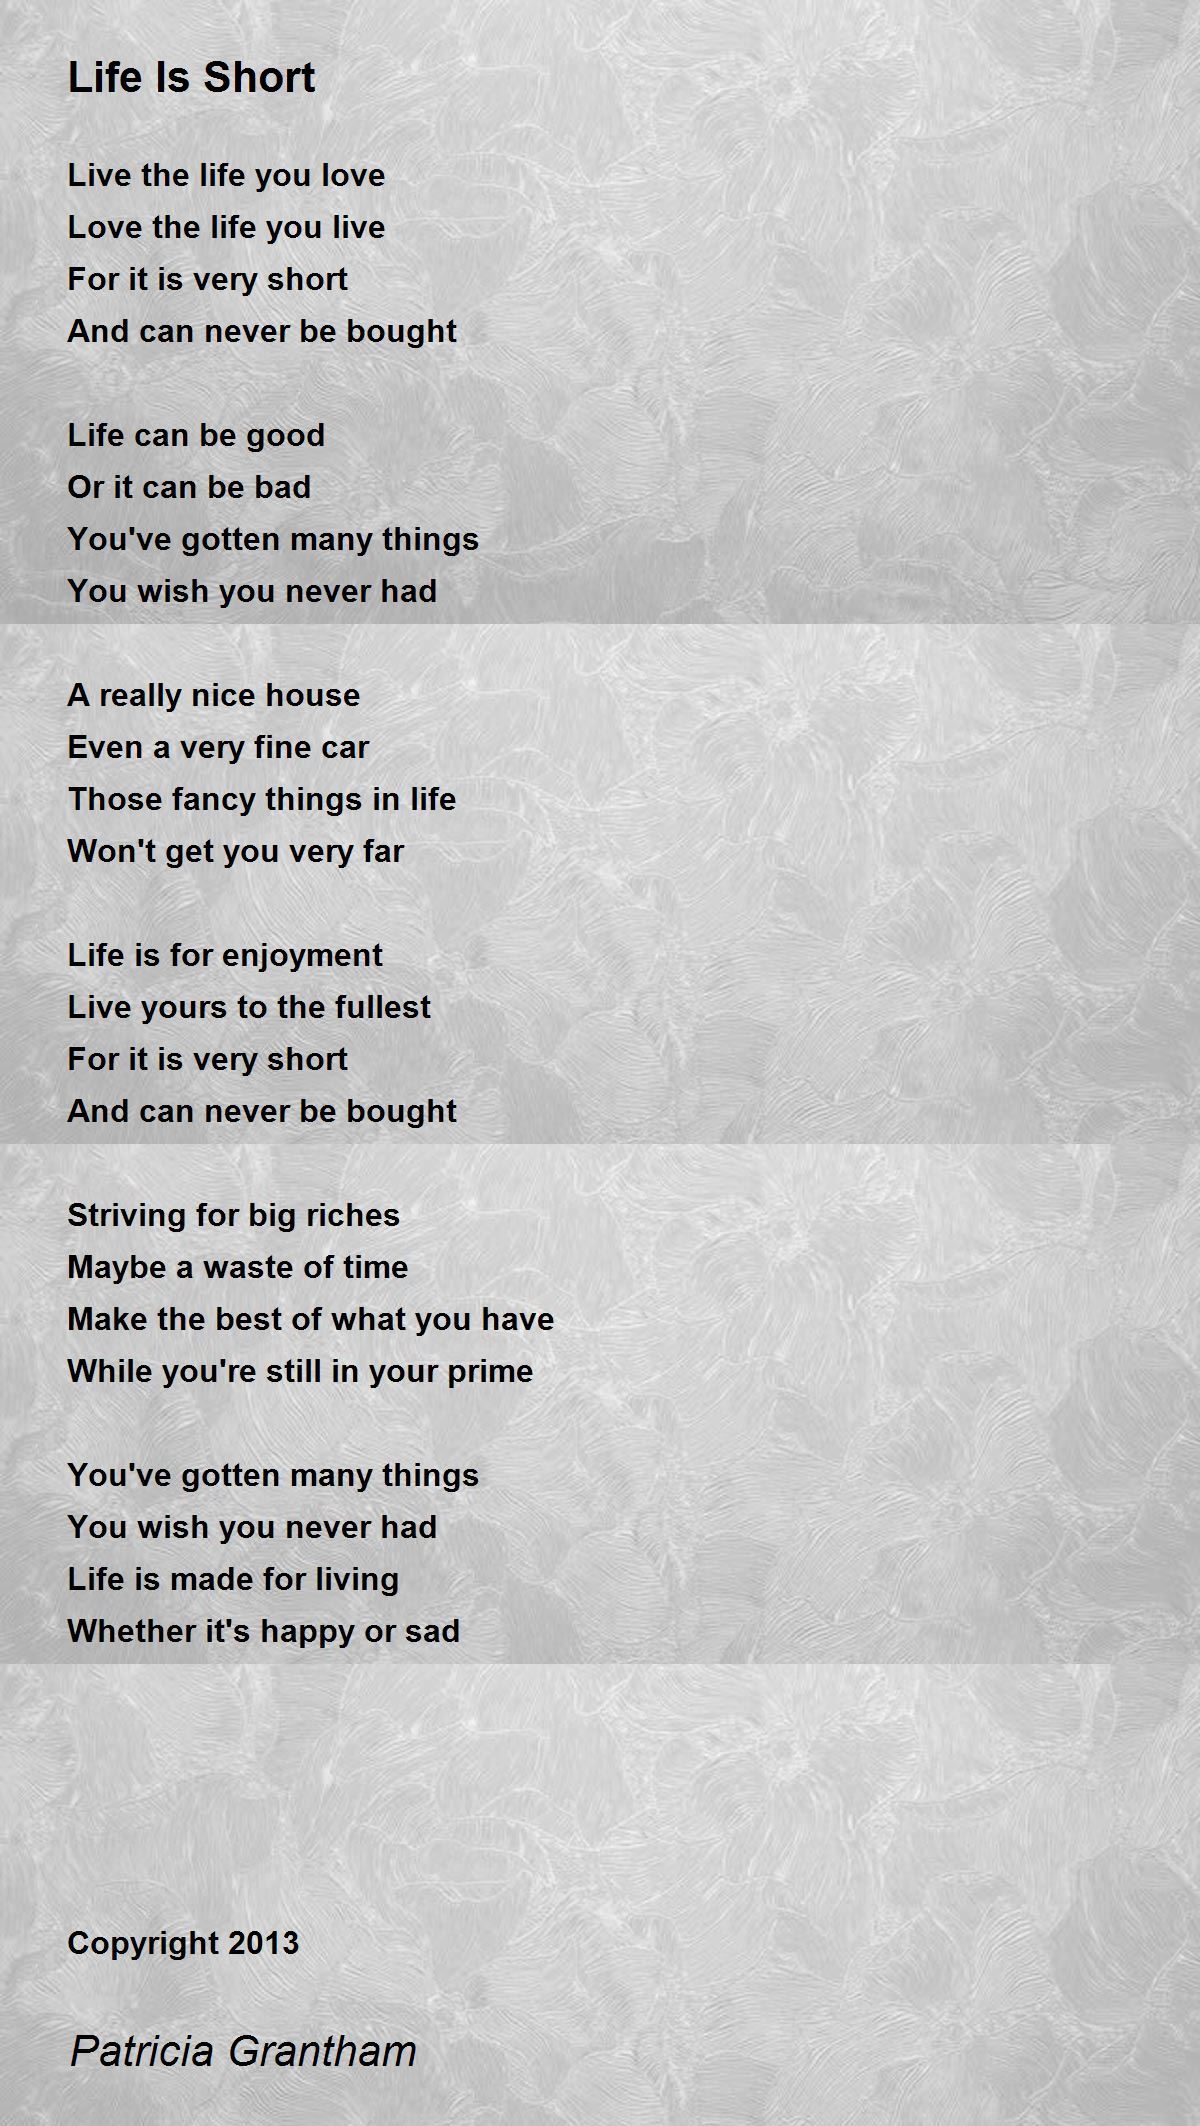 Life Is Short Poem By Patricia Grantham